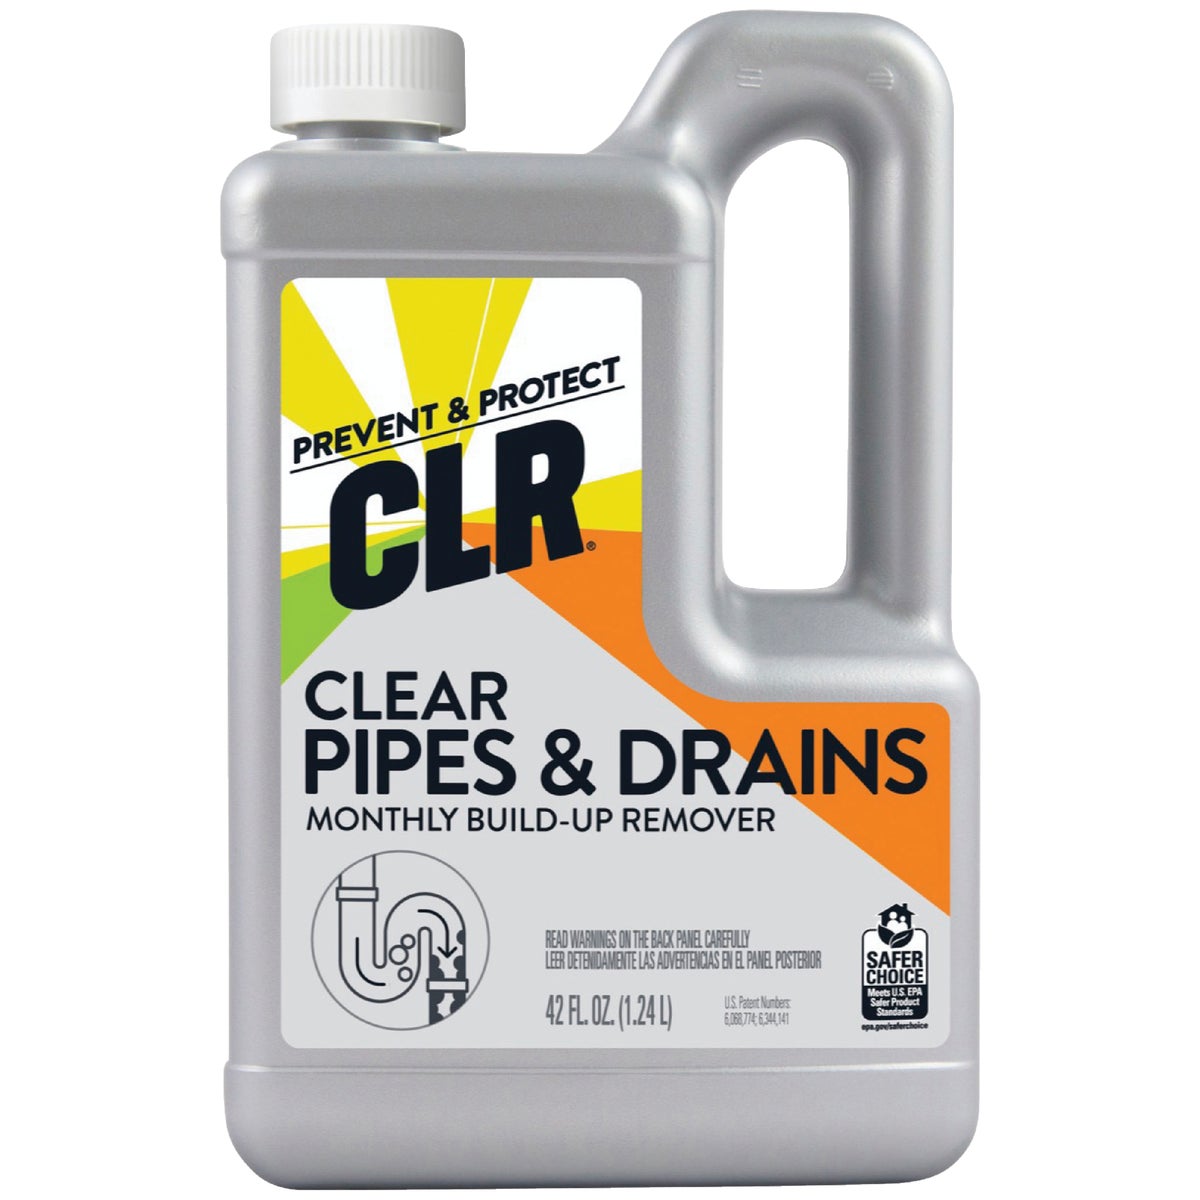 CLR Clear Pipes & Drains 42 Oz. Drain Opener & Cleaner